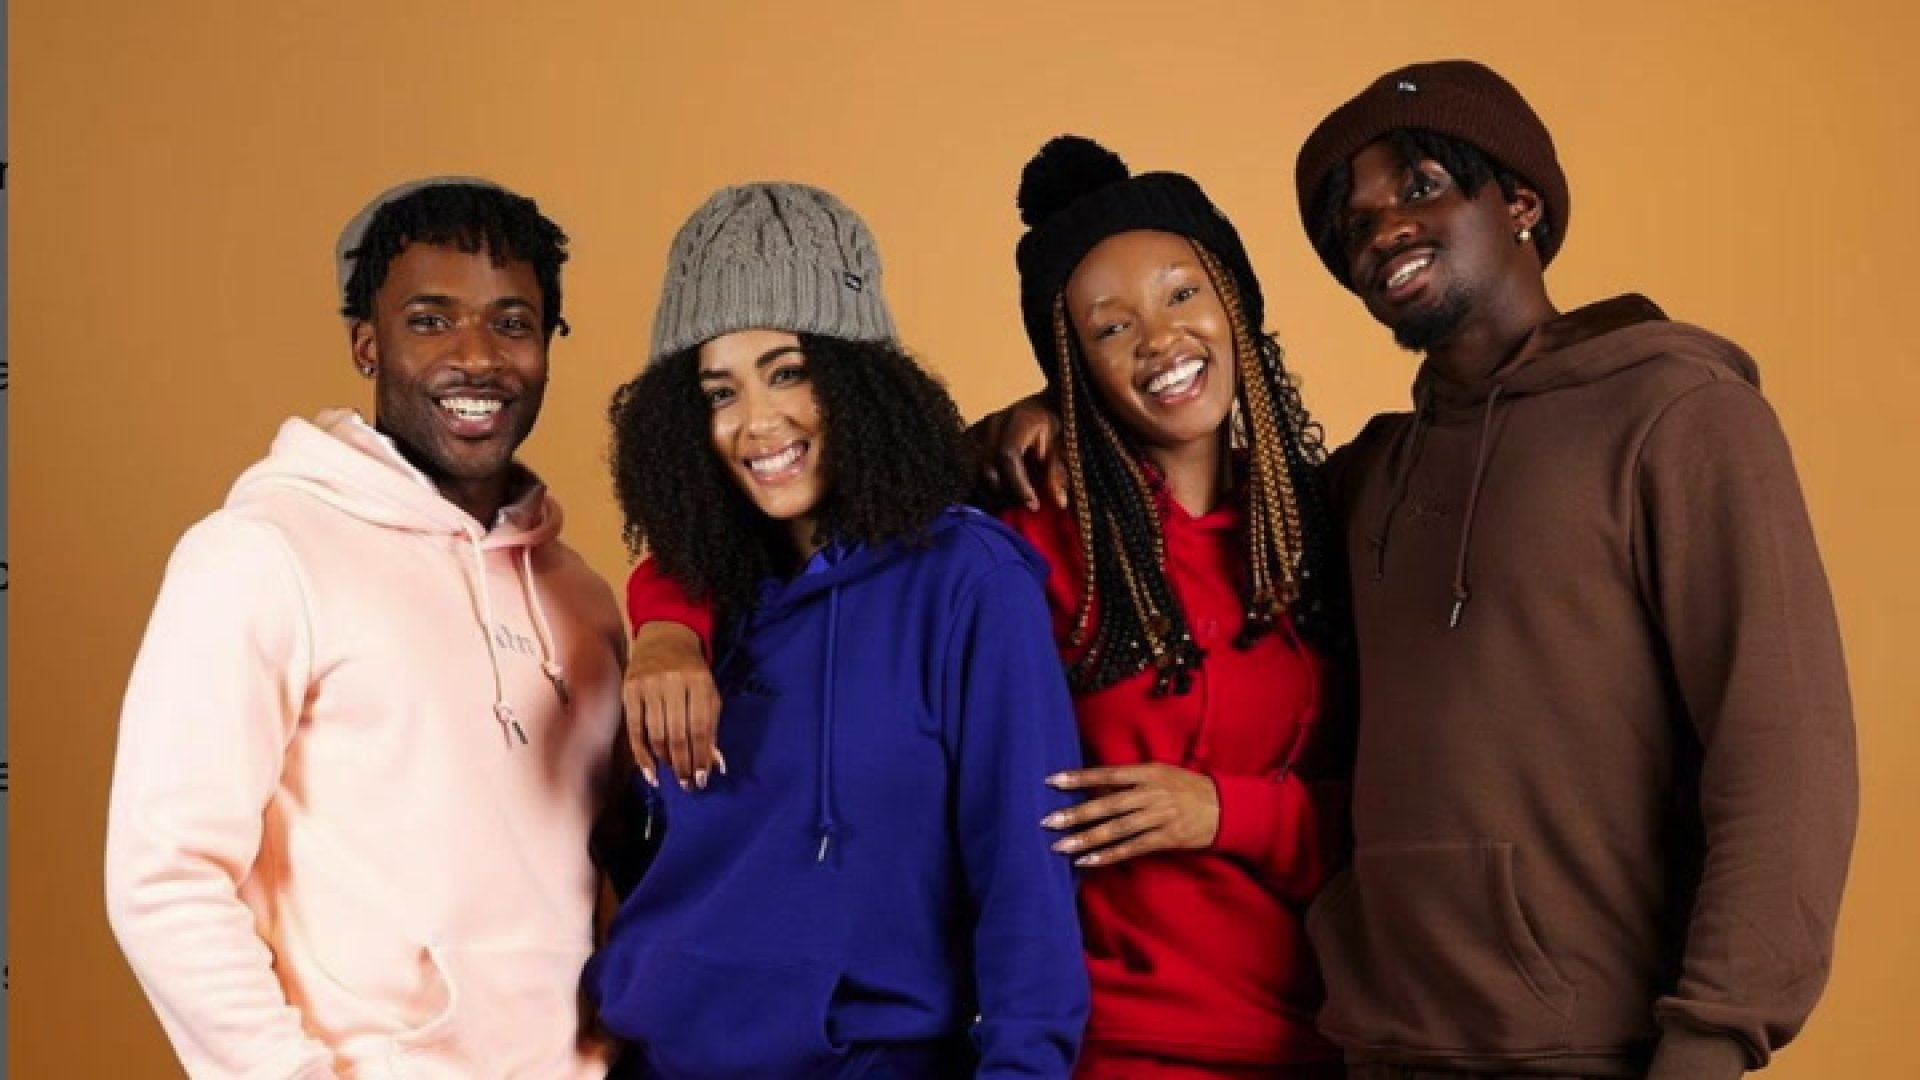 WATCH | This Black-owned company made hoodies and winter headwear that is kind to natural hair!